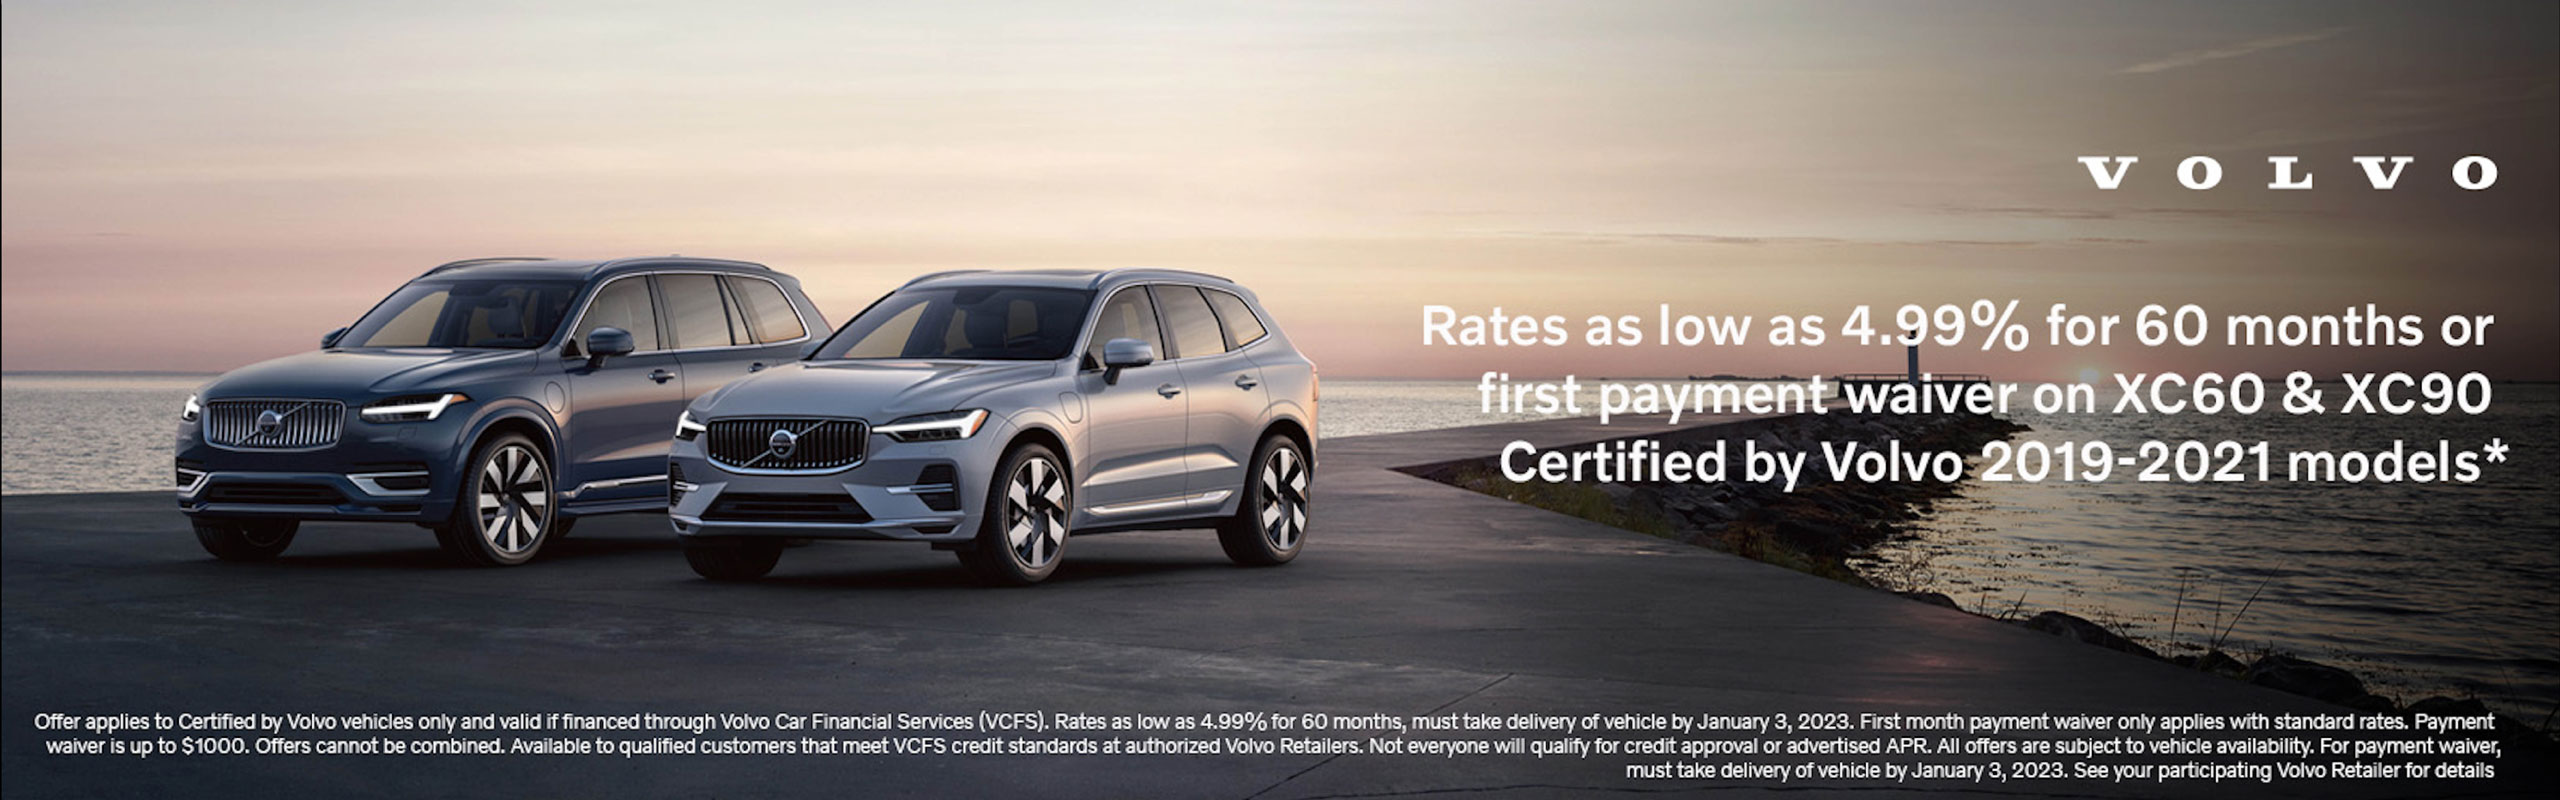 Rates as low as 4.99% for 60 months or first payment waiver on XC60 & XC90 certified by Volvo 2019-2021 models.